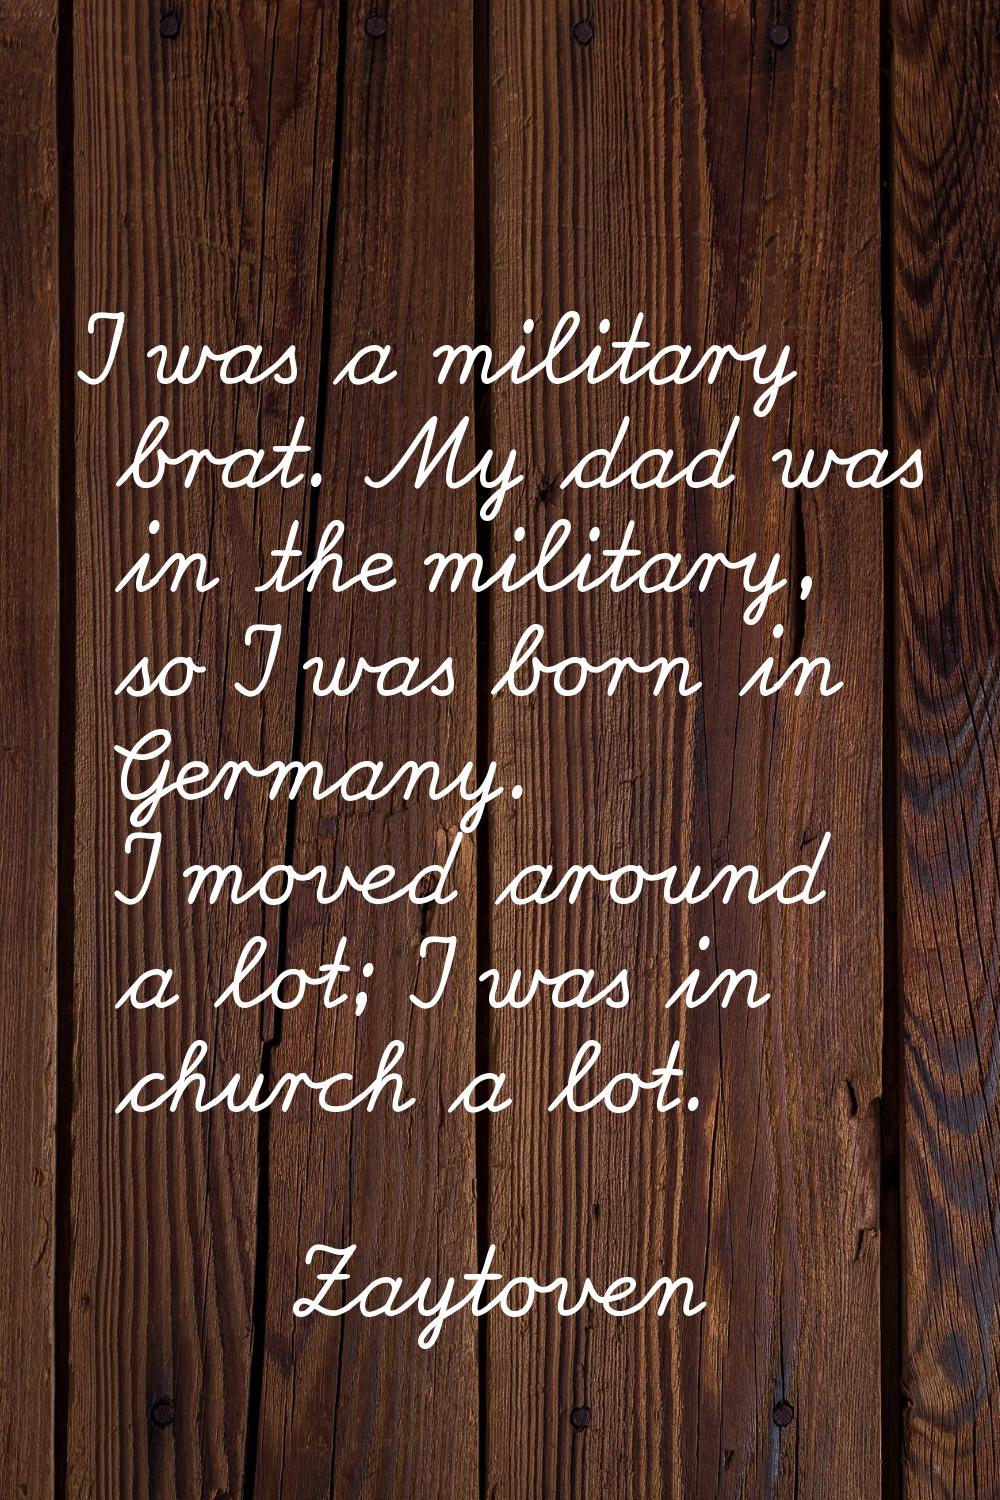 I was a military brat. My dad was in the military, so I was born in Germany. I moved around a lot; 